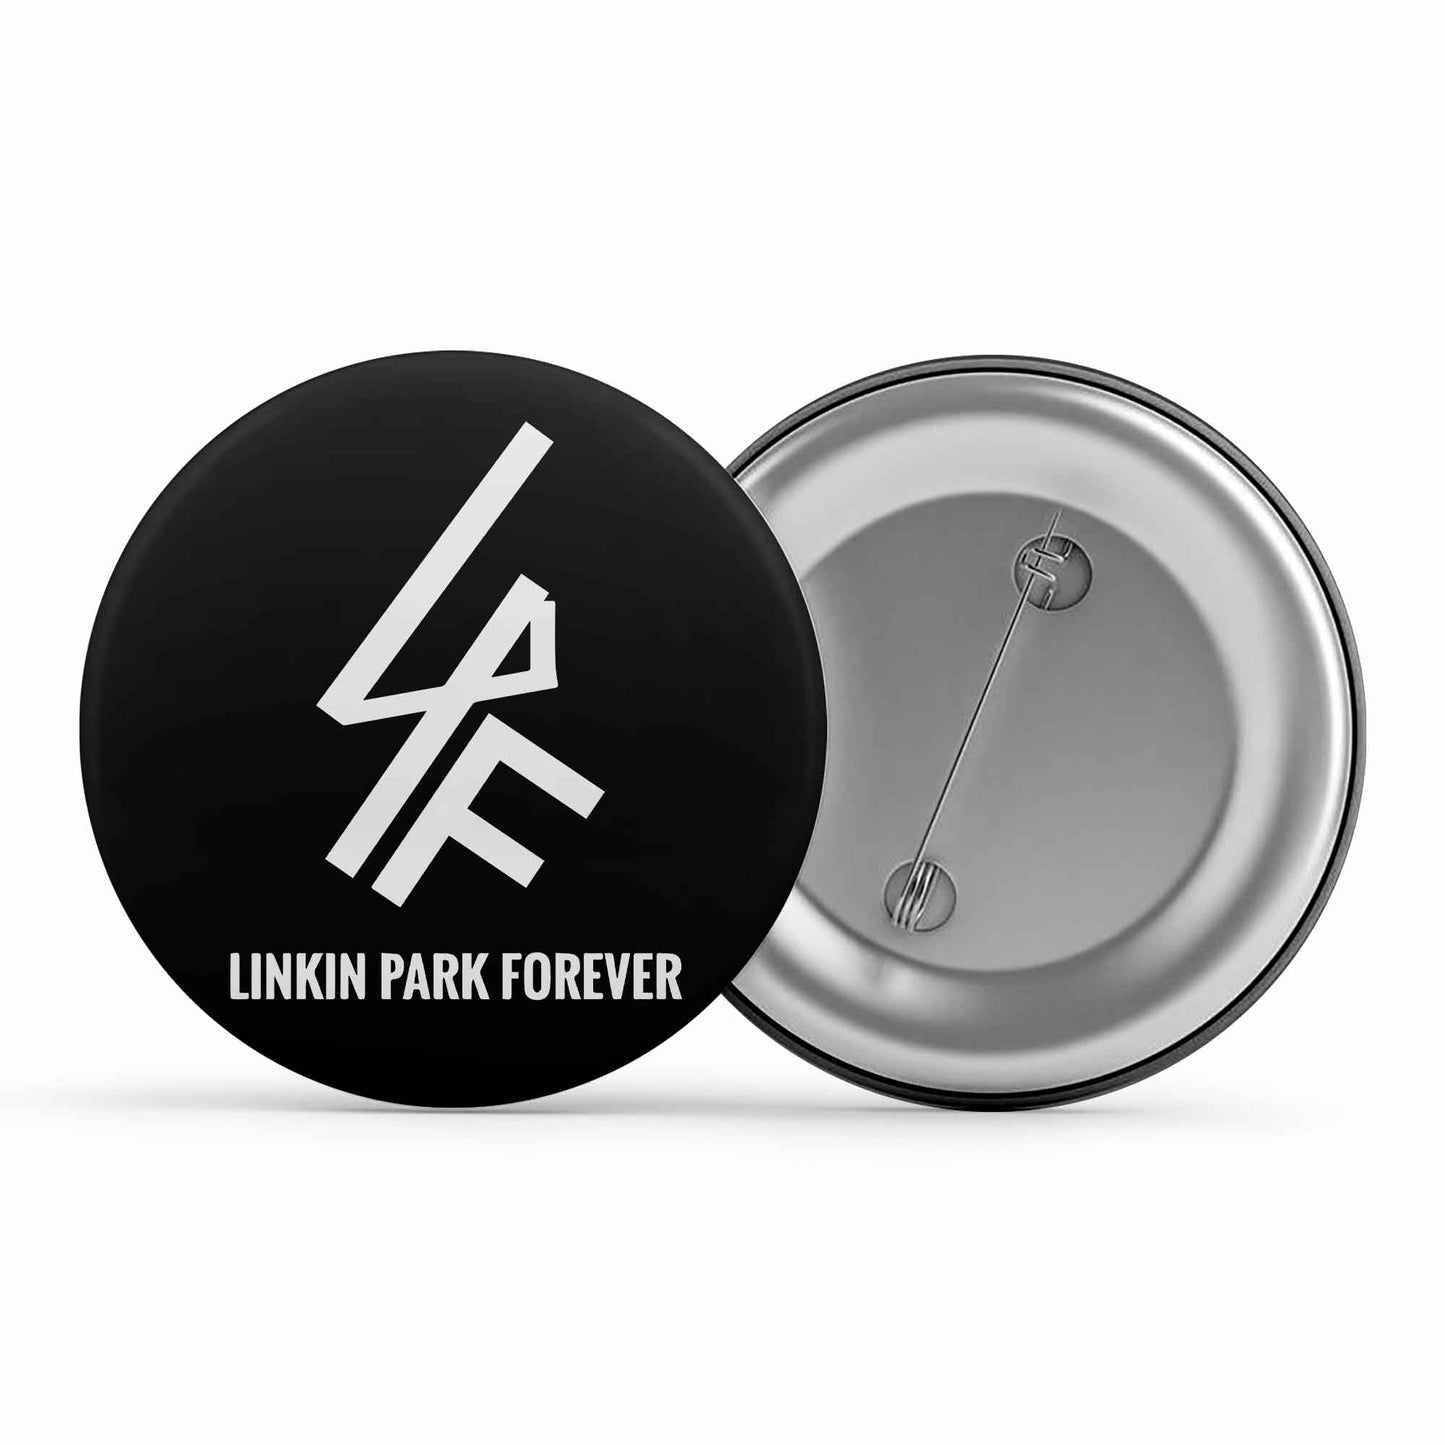 linkin park forever badge pin button music band buy online united states of america usa the banyan tee tbt men women girls boys unisex